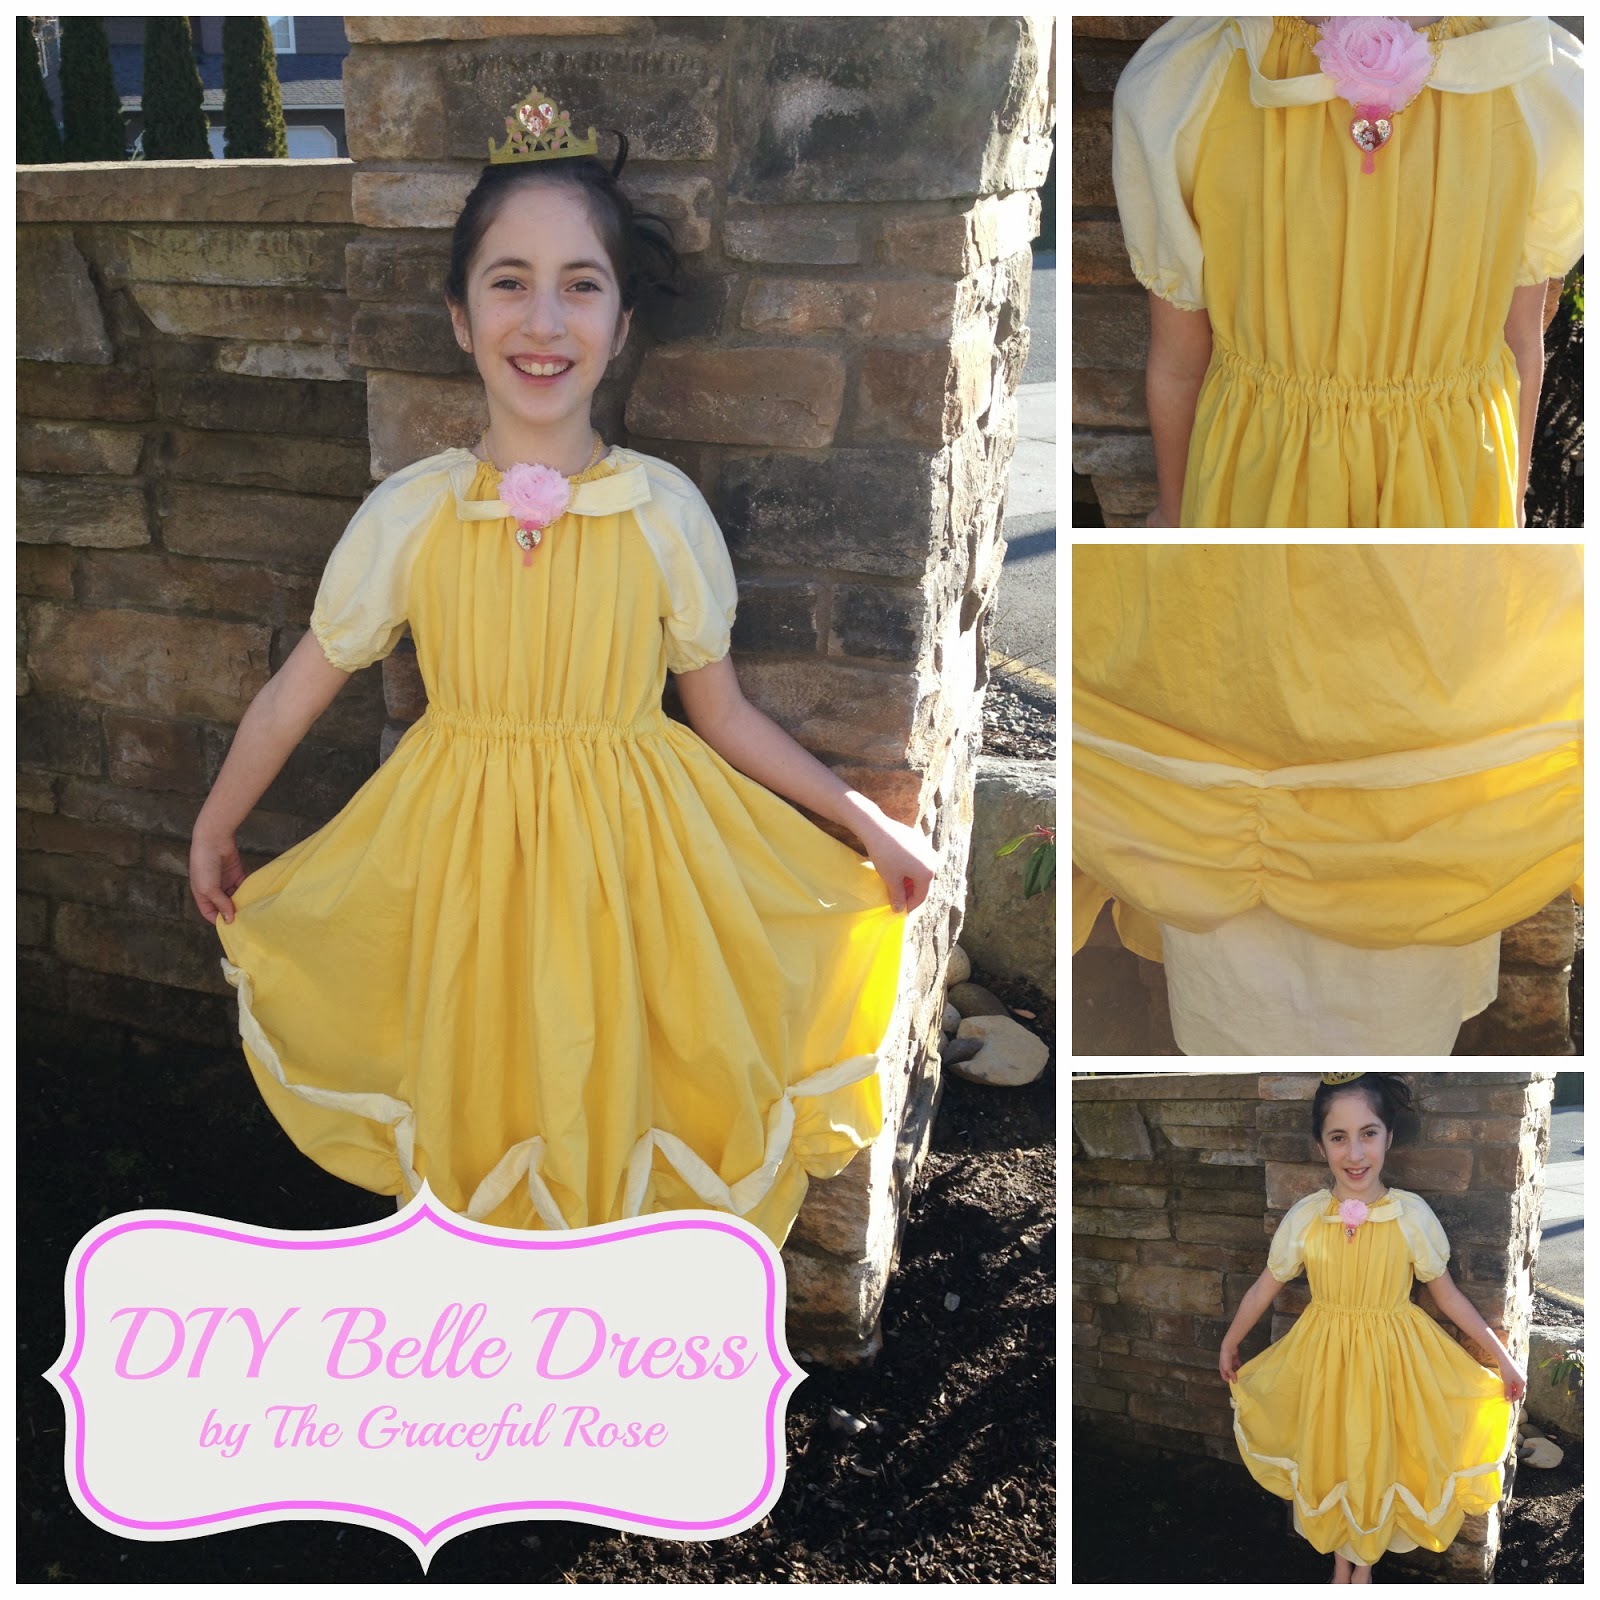 The Graceful Rose: Princess Dress for my Princess - Belle Edition